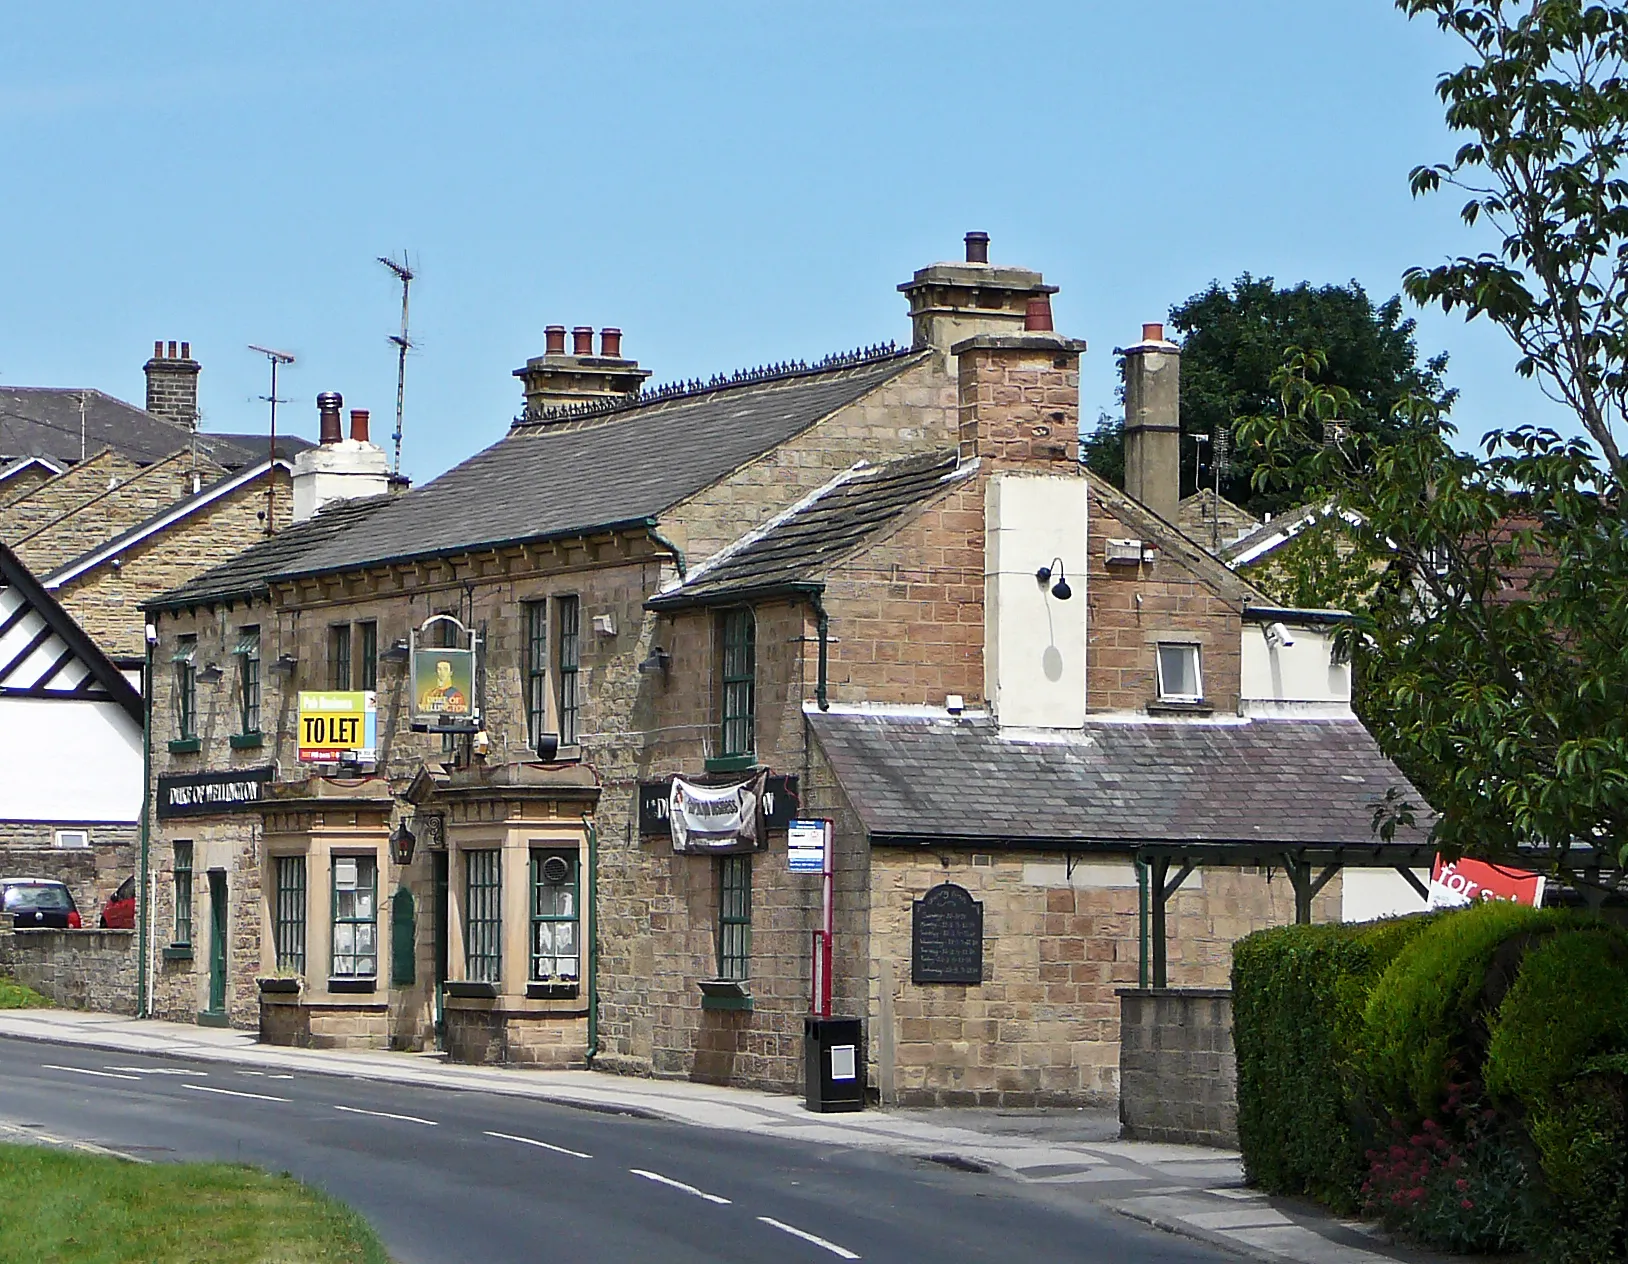 Photo showing: The Duke of Wellington public house in East Keswick, West Yorkshire.  Taken on Saturday the 11th of July 2009.